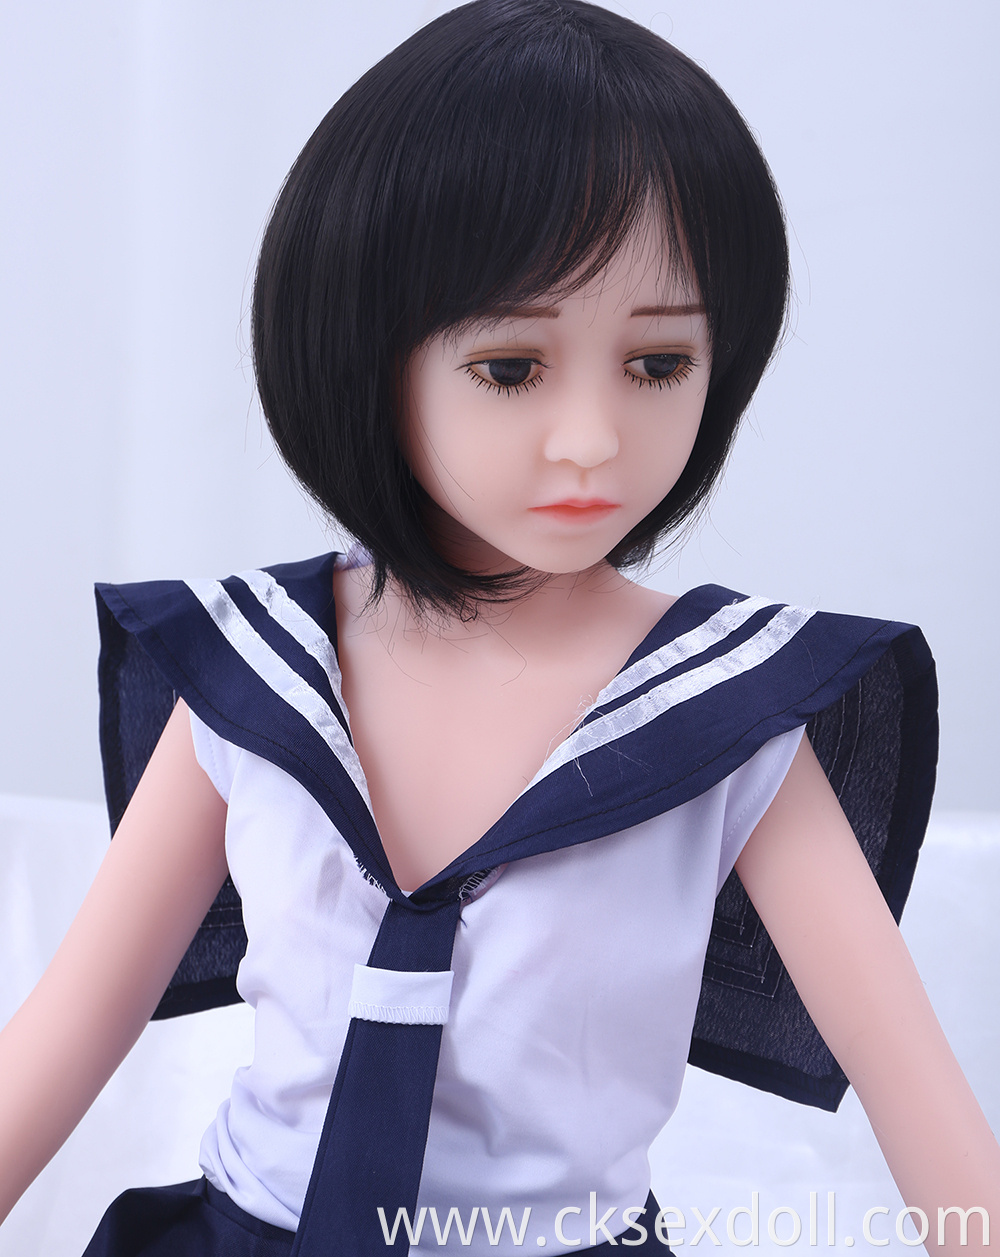 flat chest young girl doll